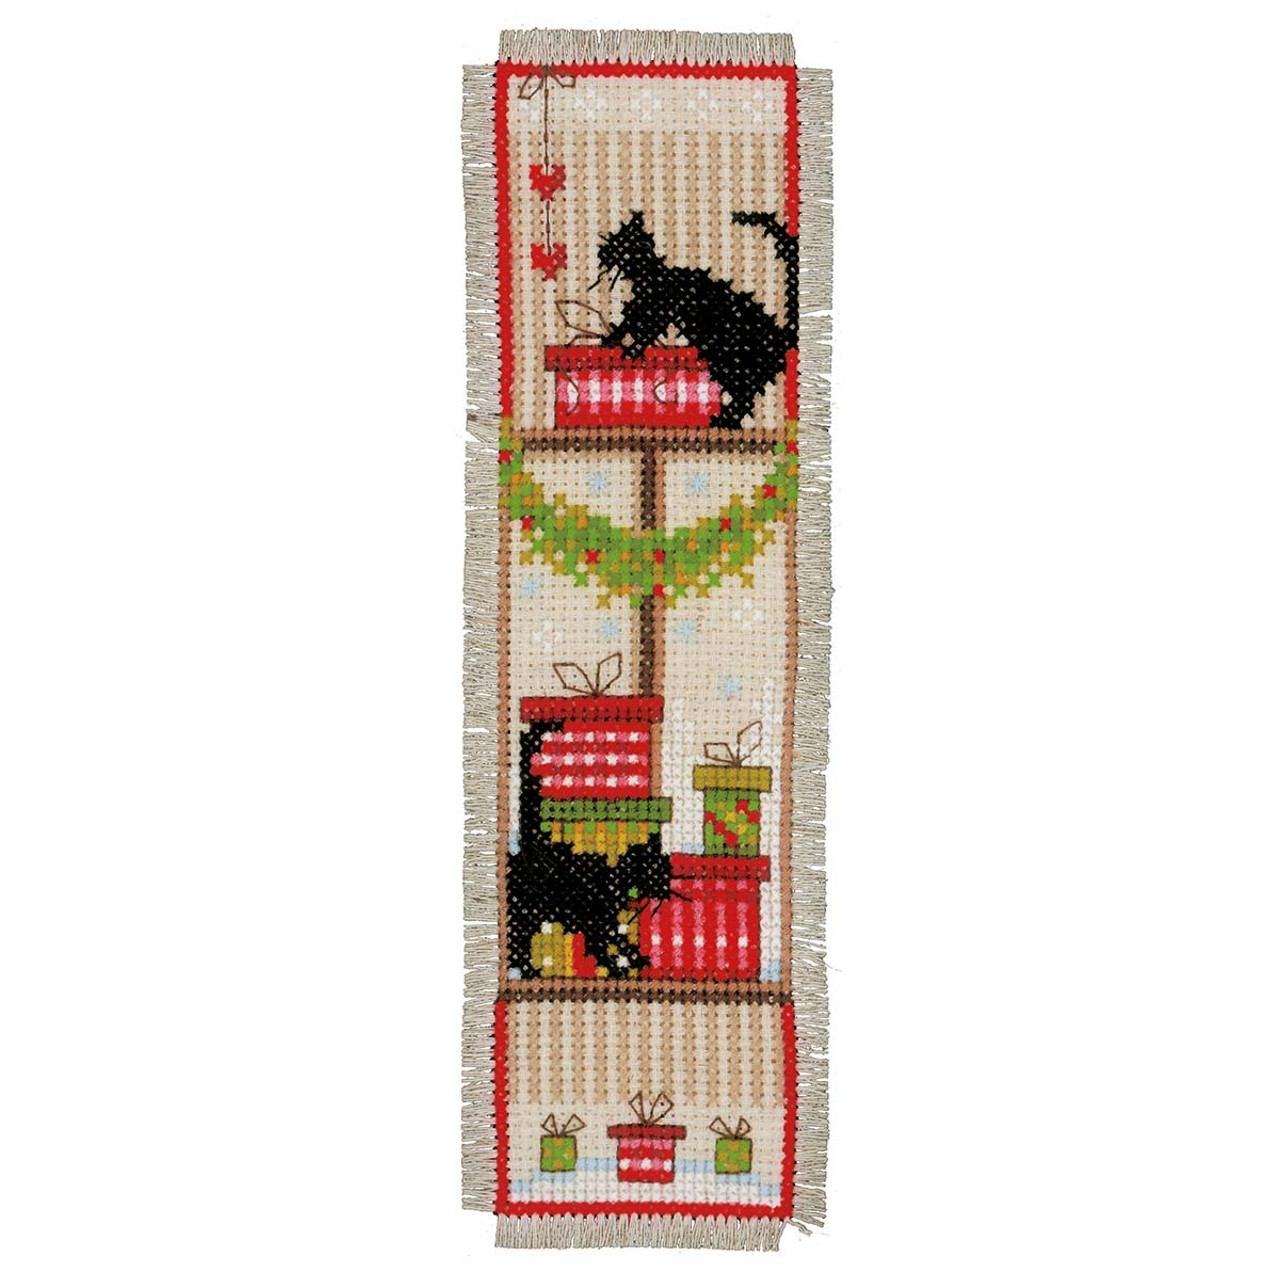 FREEBLOSS 6 Set Cross Stitch Bookmark Counted Cross Stitch Kit with 6  Different Christmas Patterns Embroidery Kit with Instruction DIY Bookmark  Kit